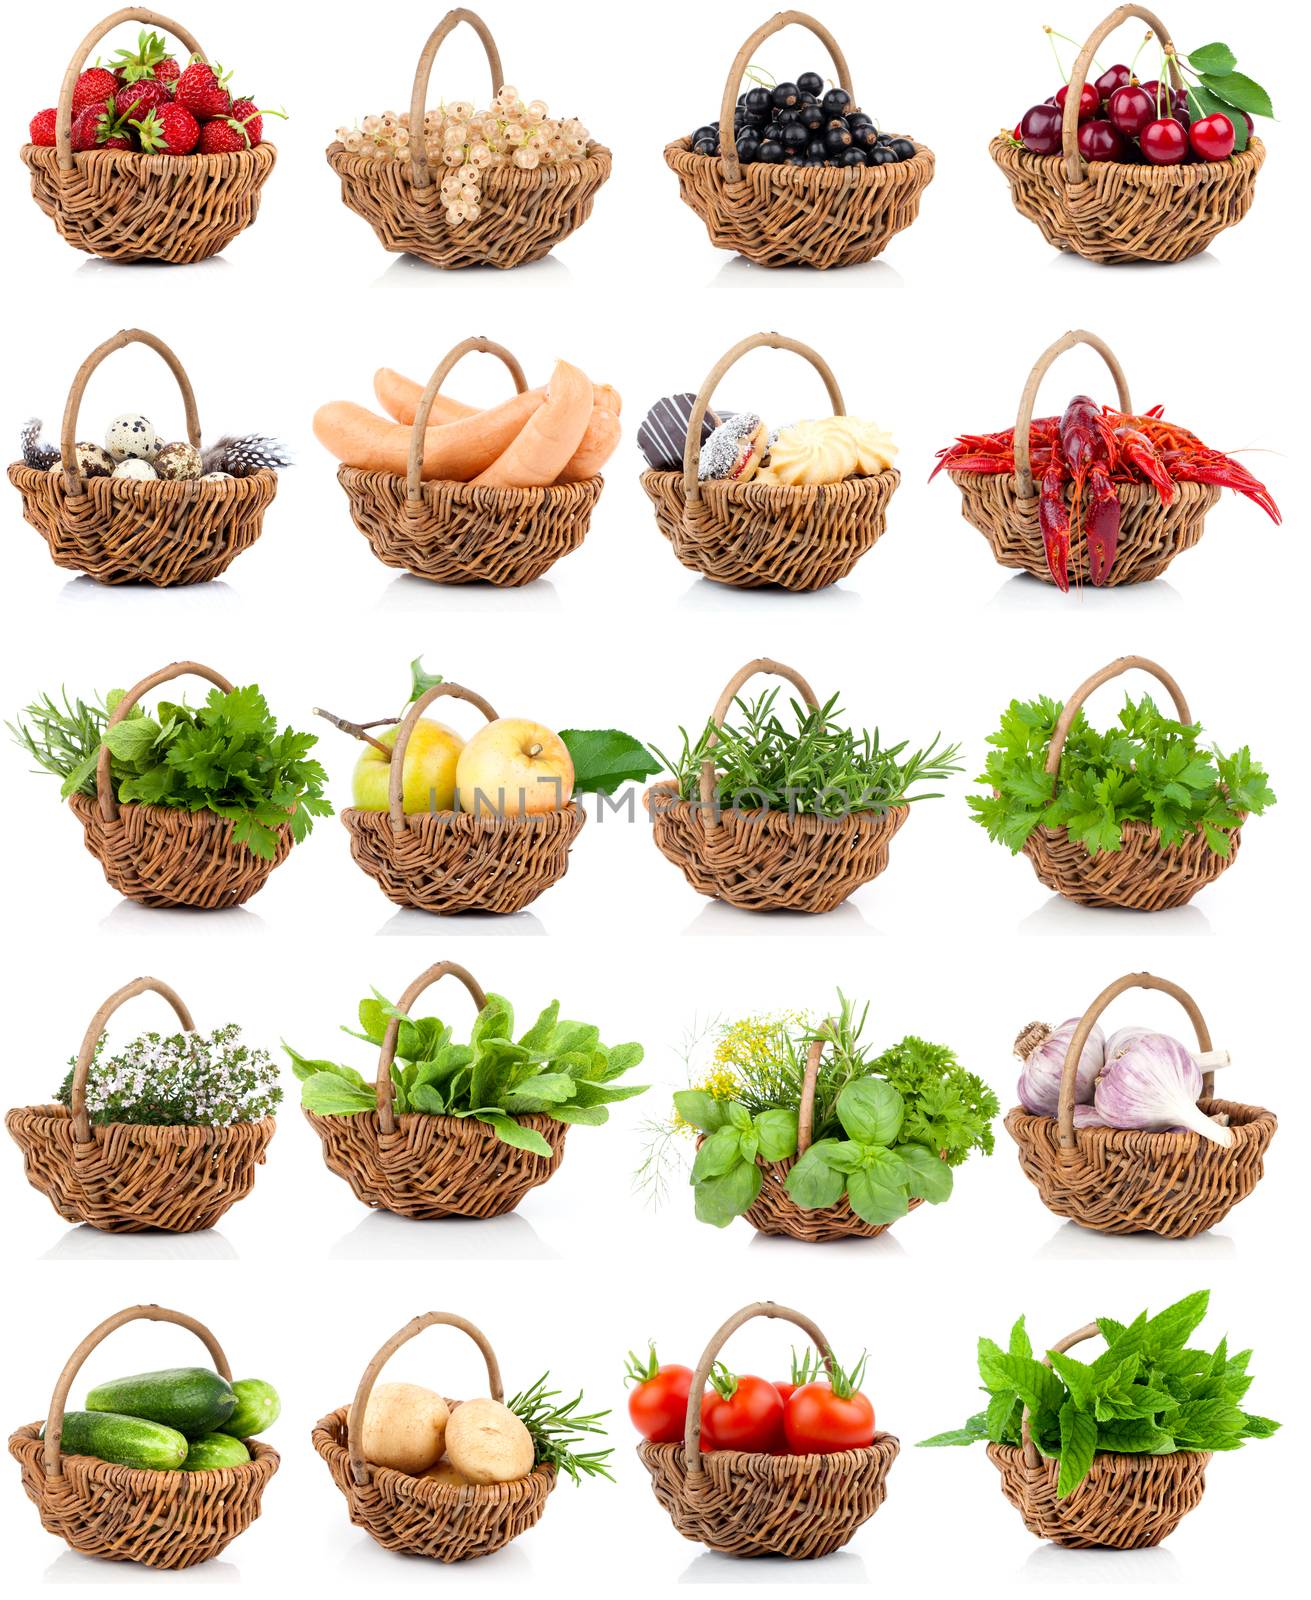 vegetation and food set in a wicker basket on a white background